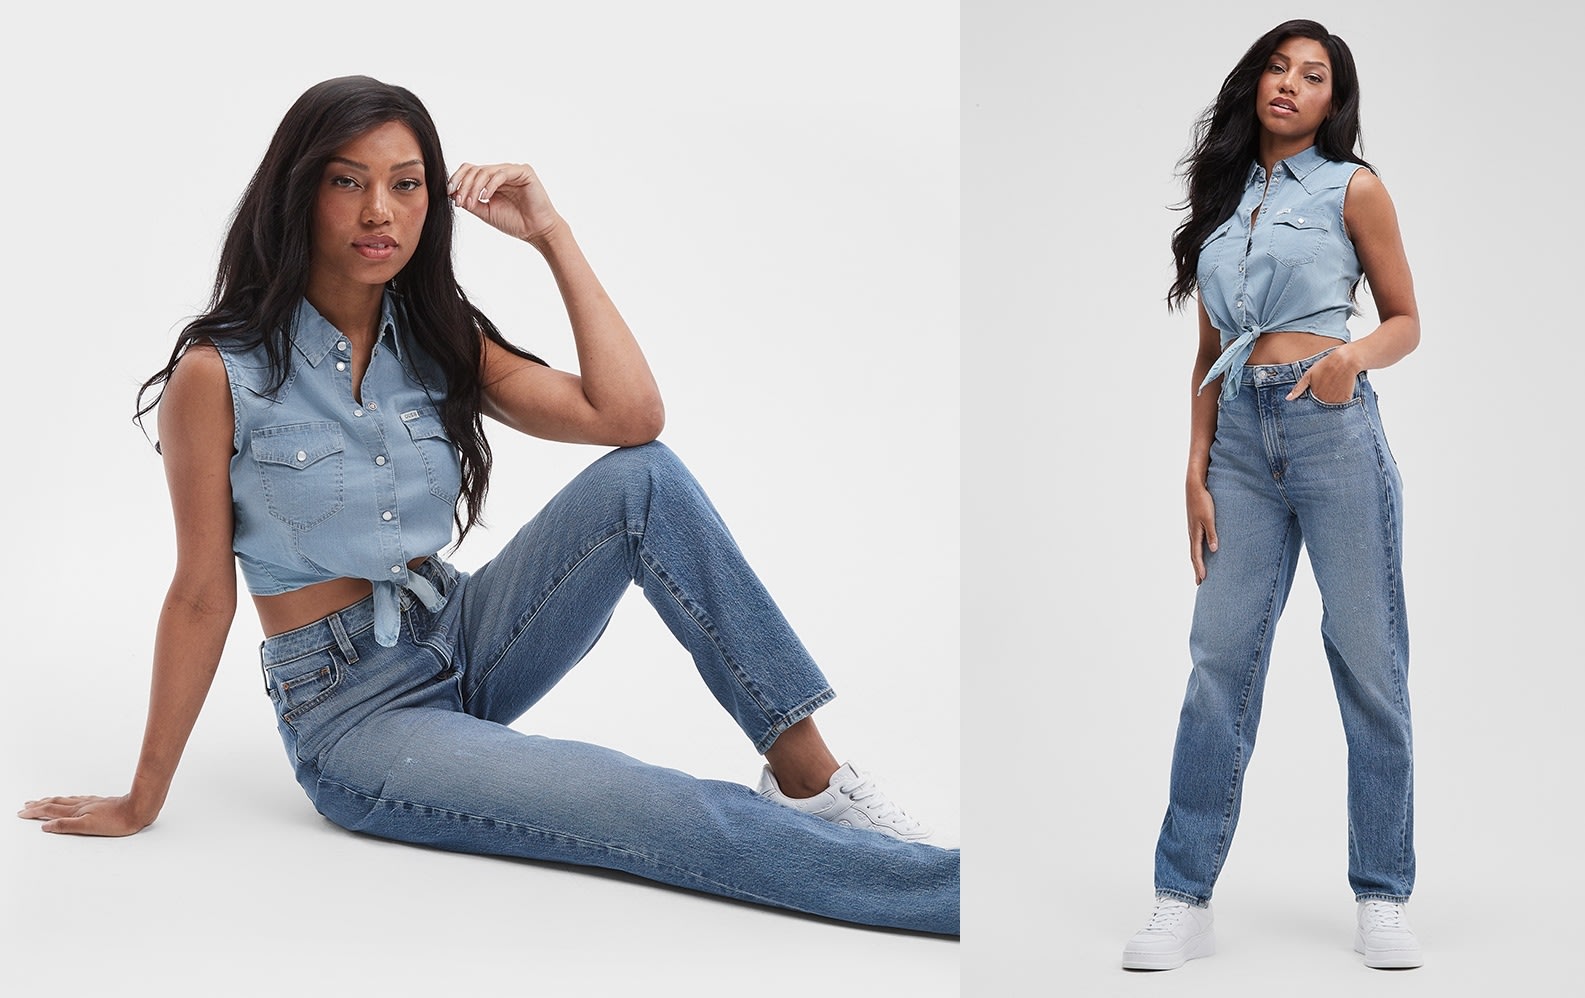 All About Jeans: Women's Jeans Guide